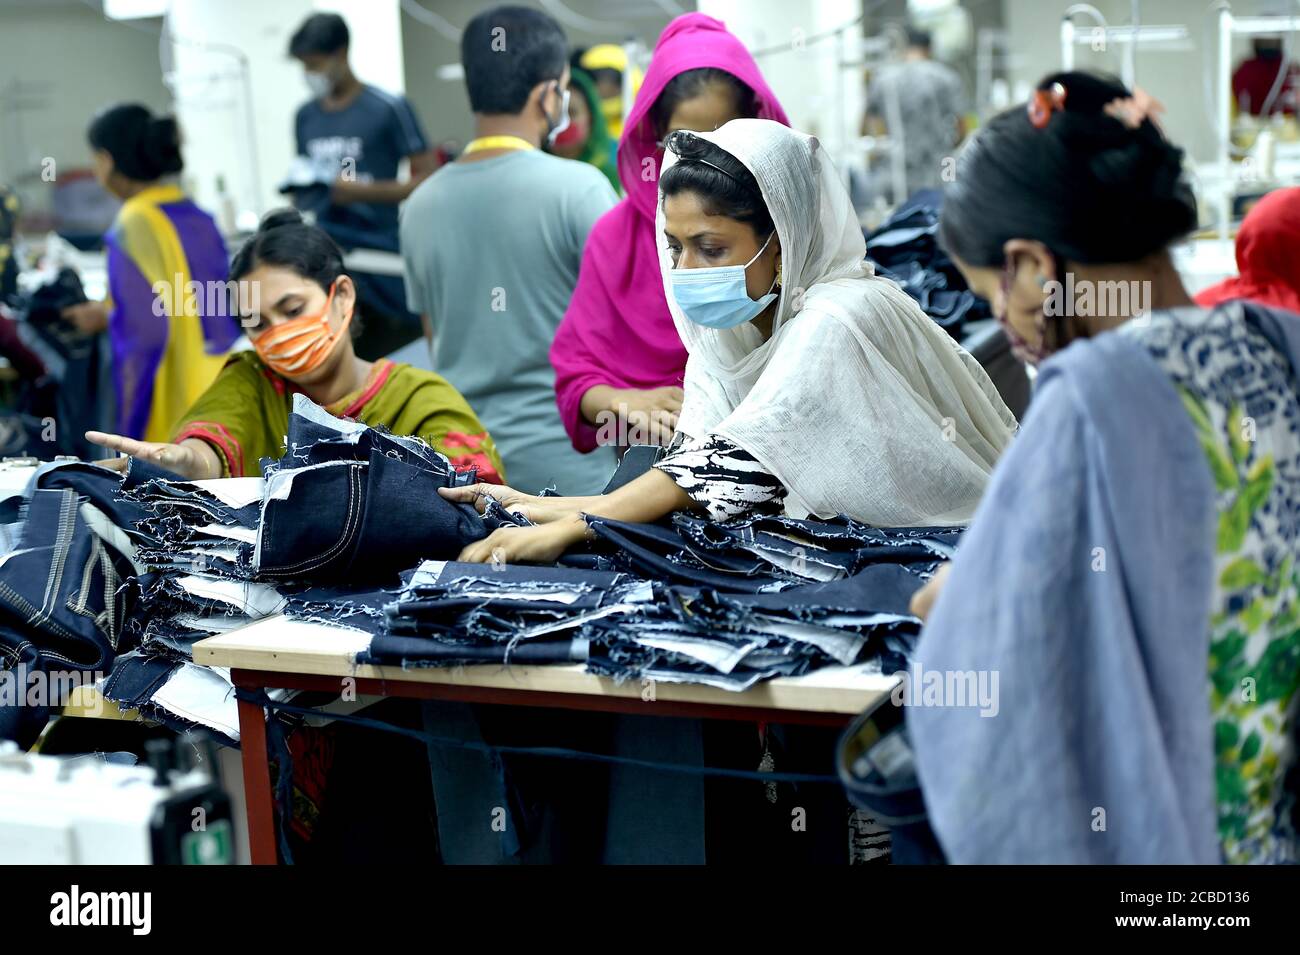 Dhaka. 12th Aug, 2020. People work at a garment factory in Dhaka, Bangladesh, on Aug. 12, 2020. Bangladesh's July export income was over 44 percent higher than that in June, meaning the country's export sector is limping back to normalcy after suffering serious blows owing to COVID-19 impacts. Of the total earnings, the Export Promotion Bureau (EPB) data showed the country's income from ready-made garment items, including knitwear and woven, stood at 3.24 billion U.S. dollars. Credit: Xinhua/Alamy Live News Stock Photo